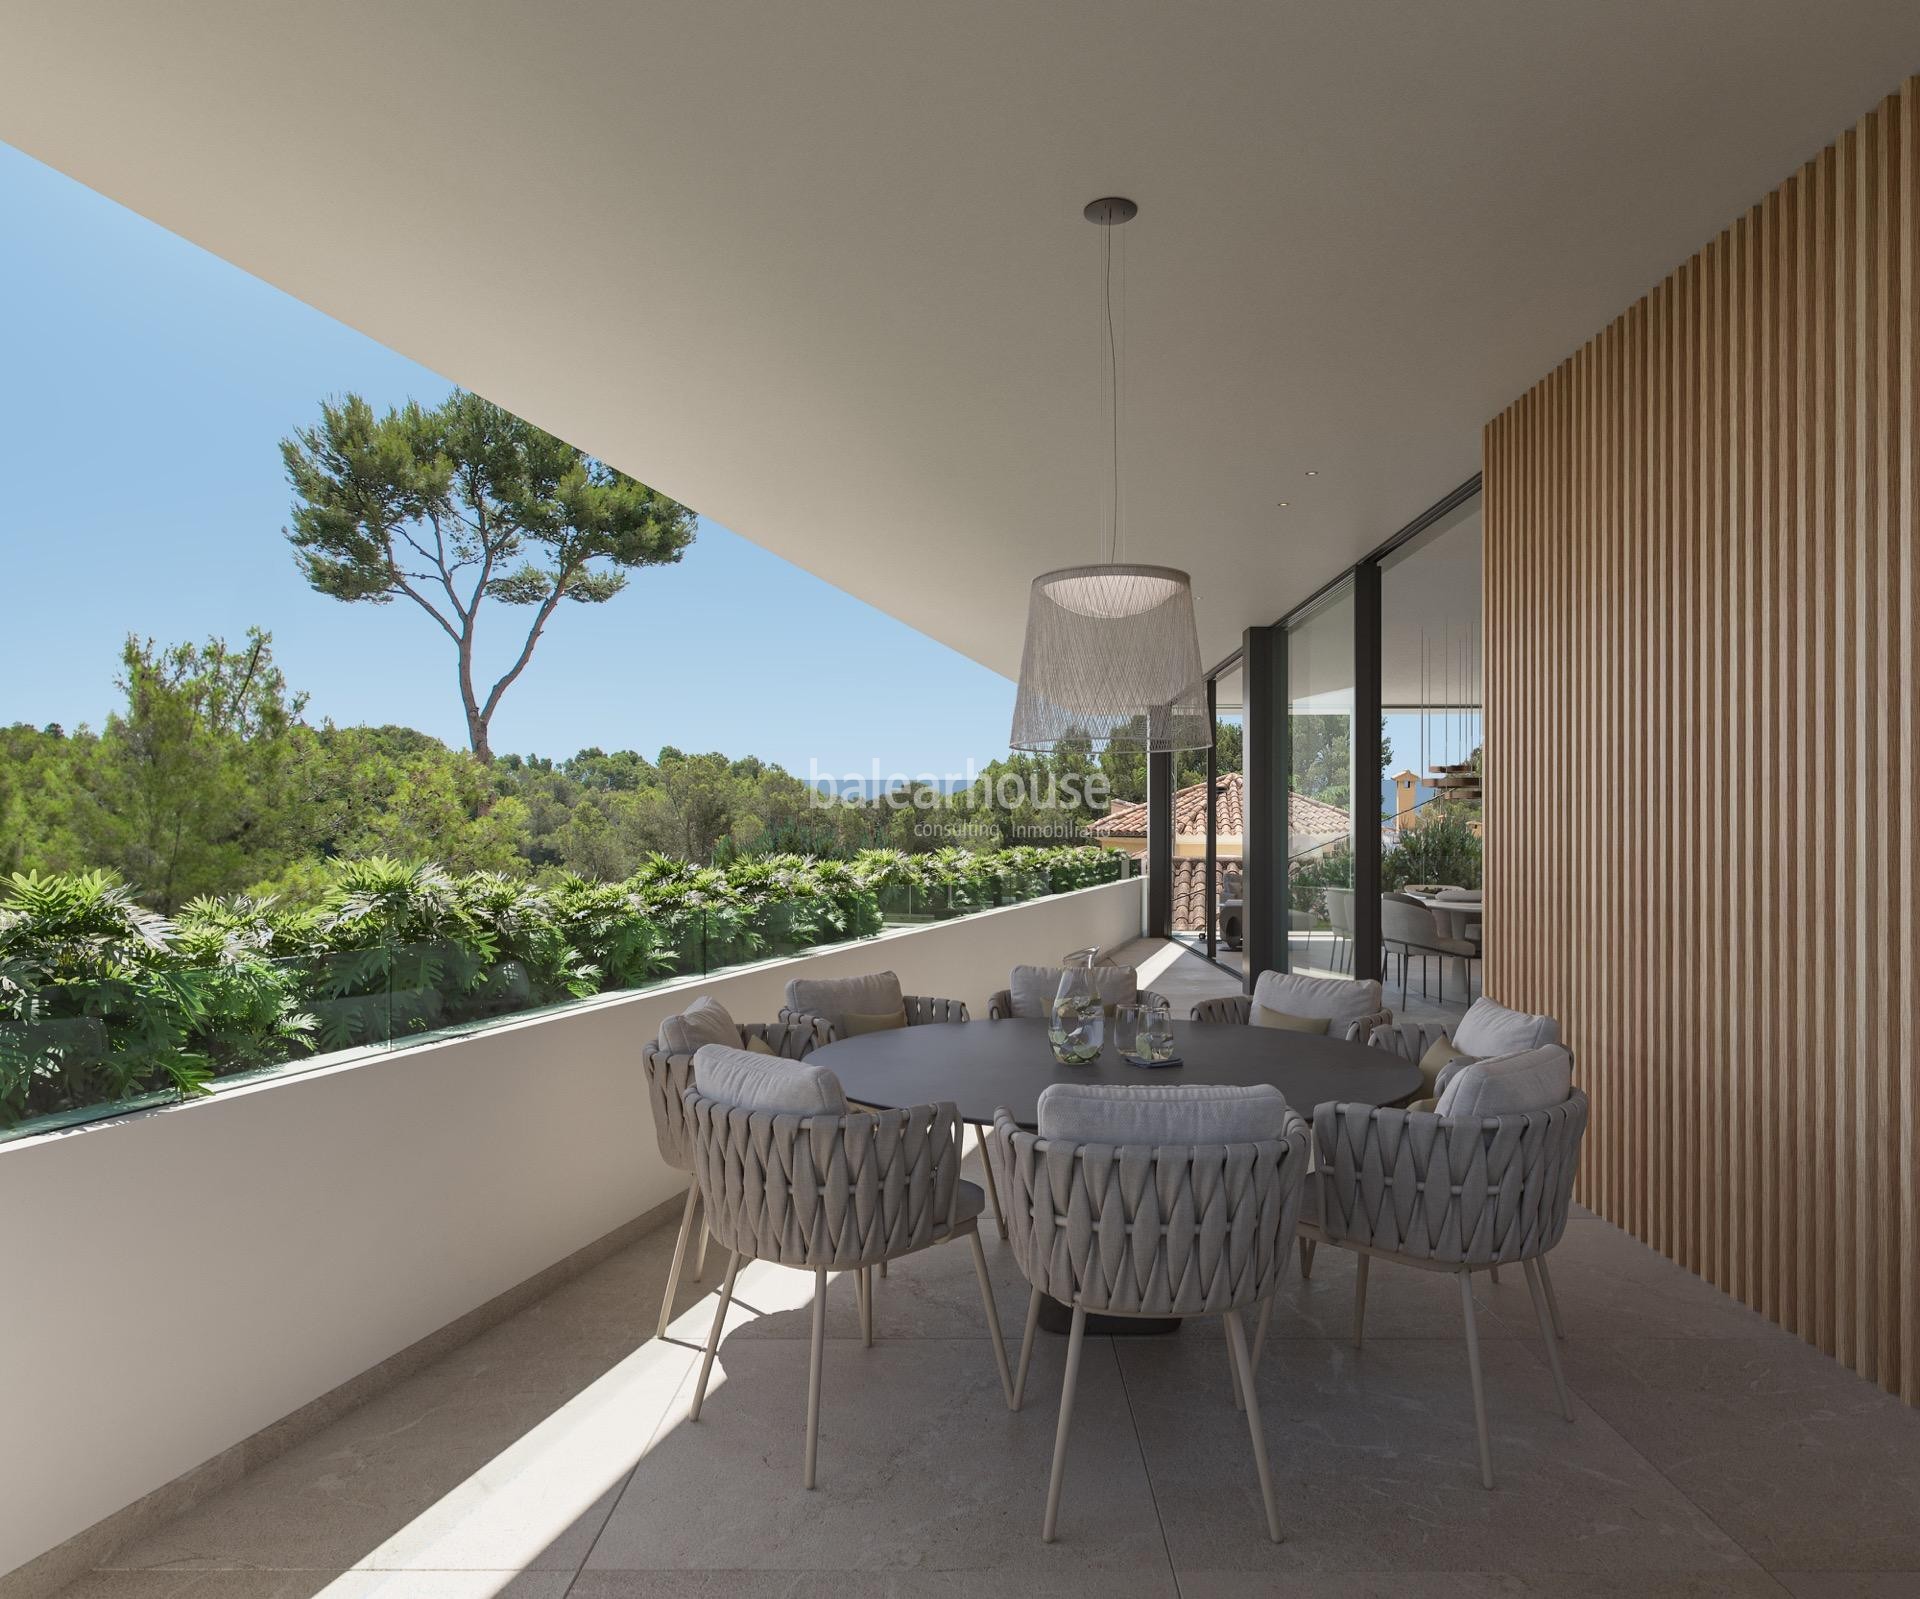 Contemporary new build villa in Costa d'en Blanes with beautiful views that reach to the sea